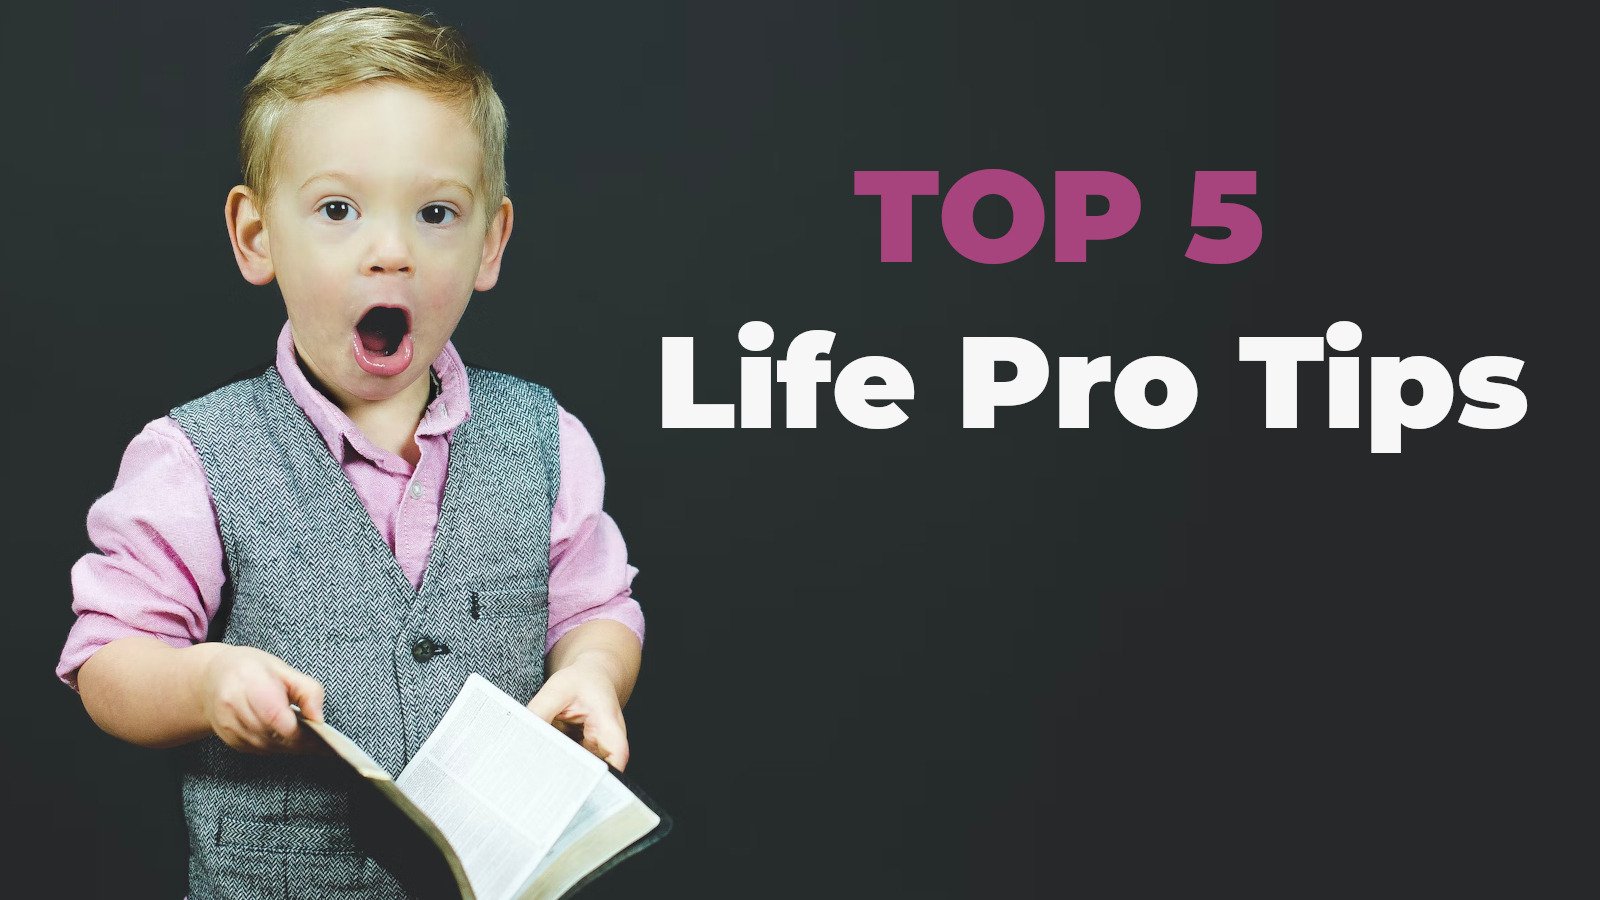 Top 5 Life Pro Tips Of All Time